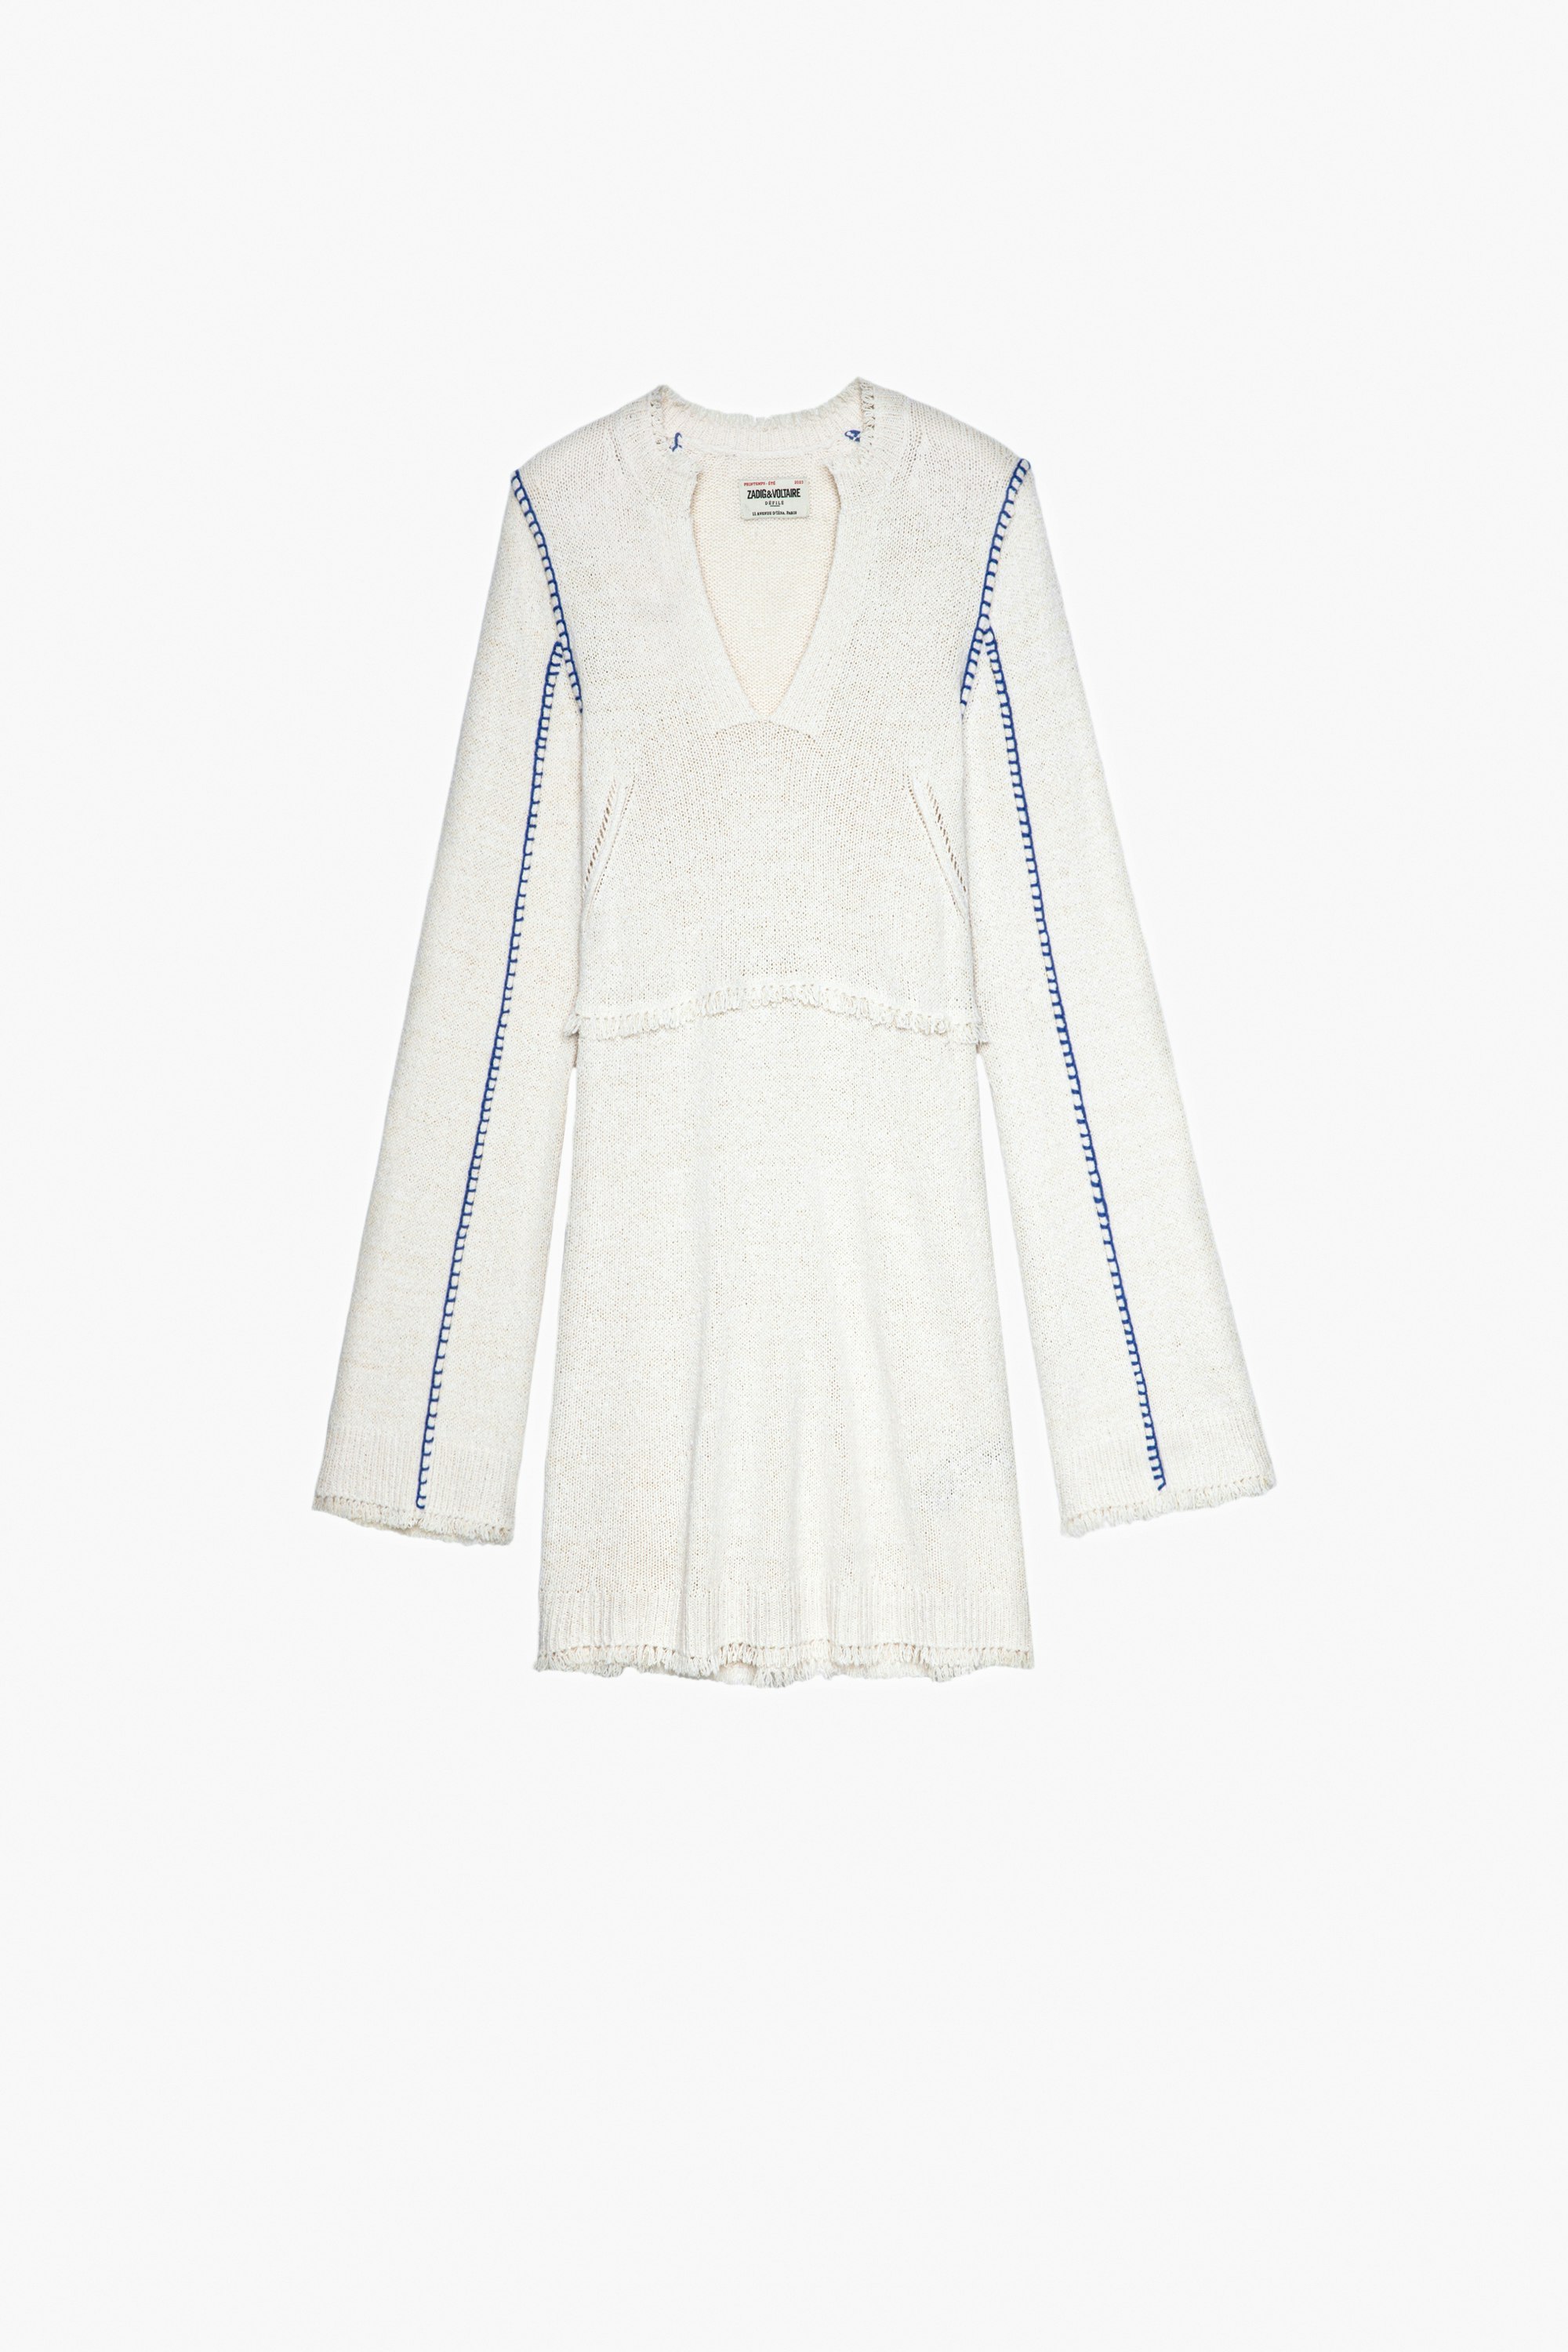 Hiko Dress Women's off-white short silk dress with fringed trims and topstitching